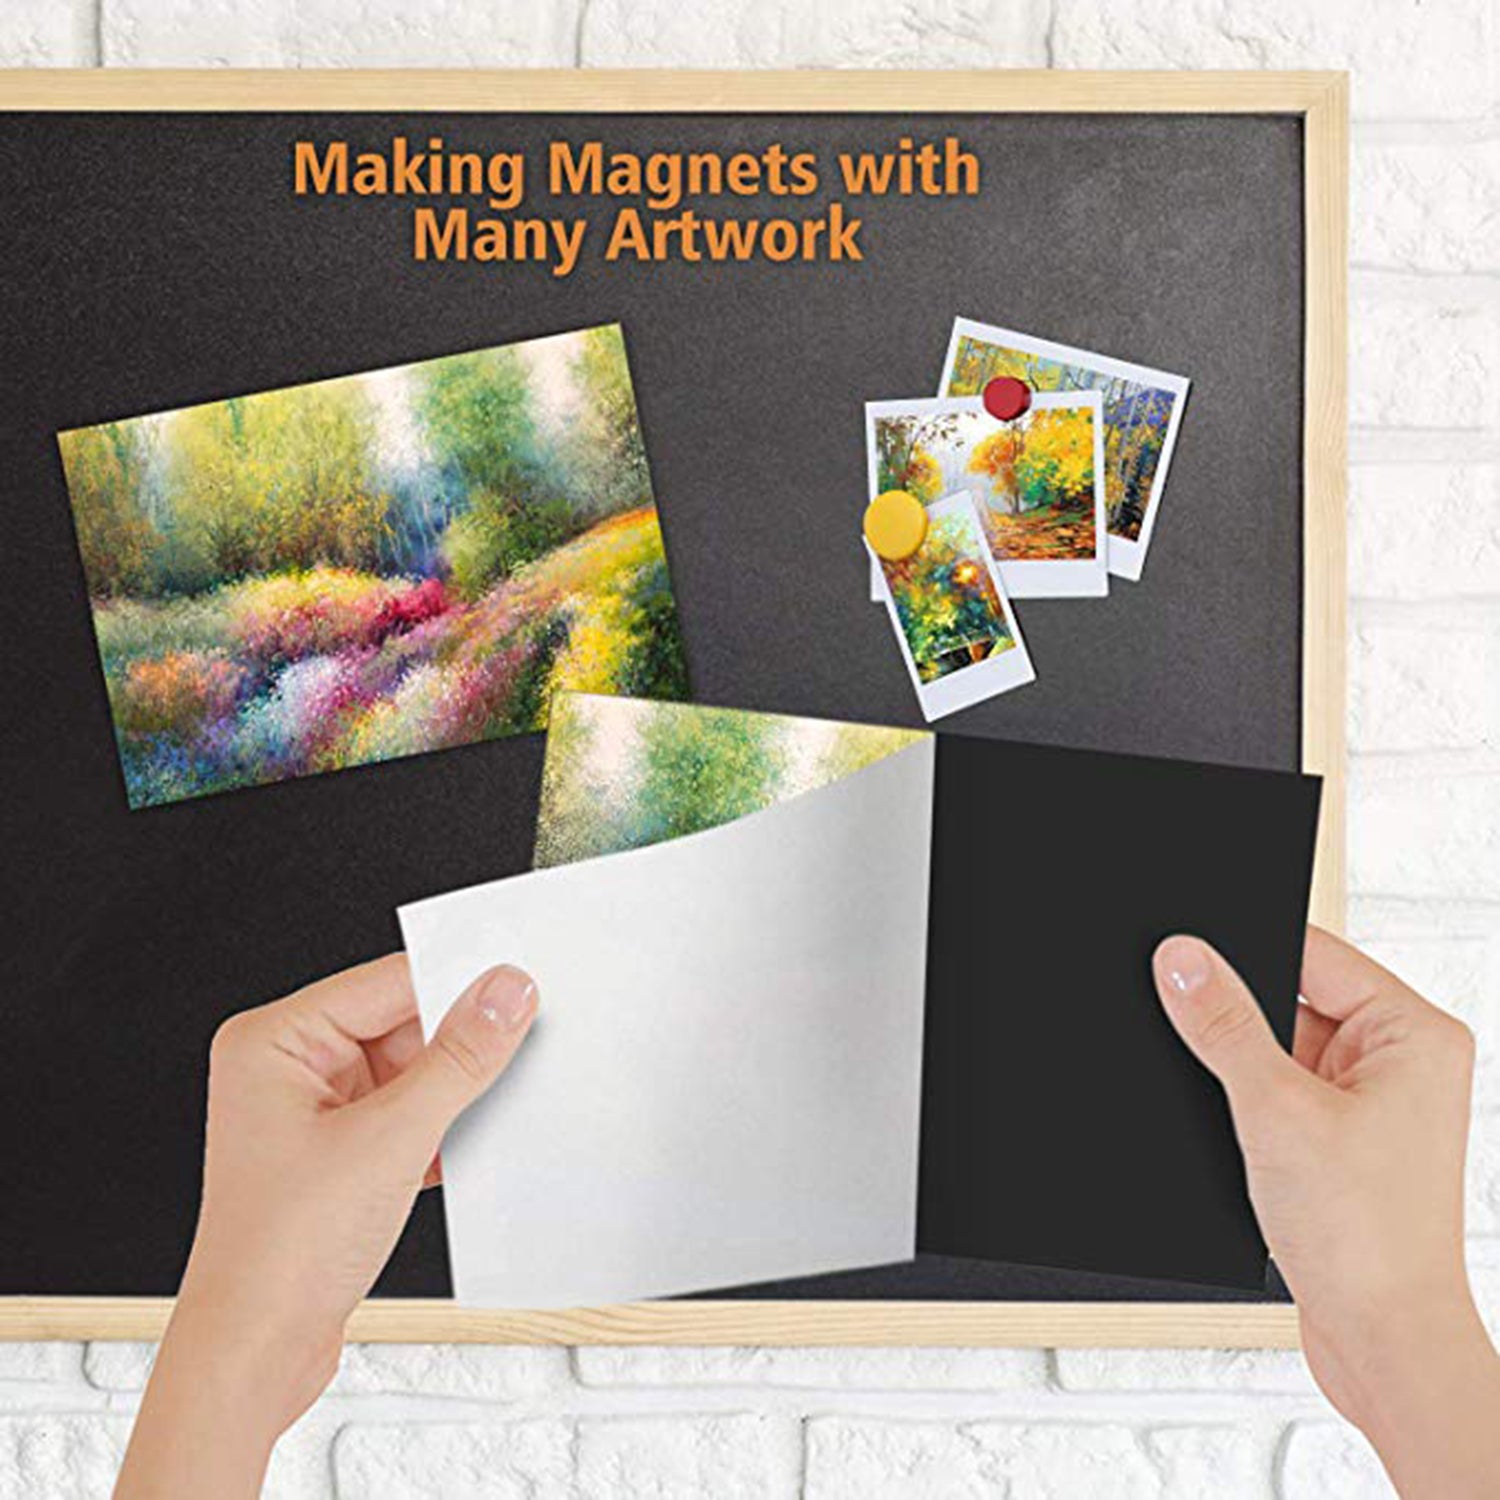 Magnetic Adhesive Sheet 8 X 10 Inch, Magicfly Pack of 30 Flexible Magnet Sheets with Adhesive - Magicfly